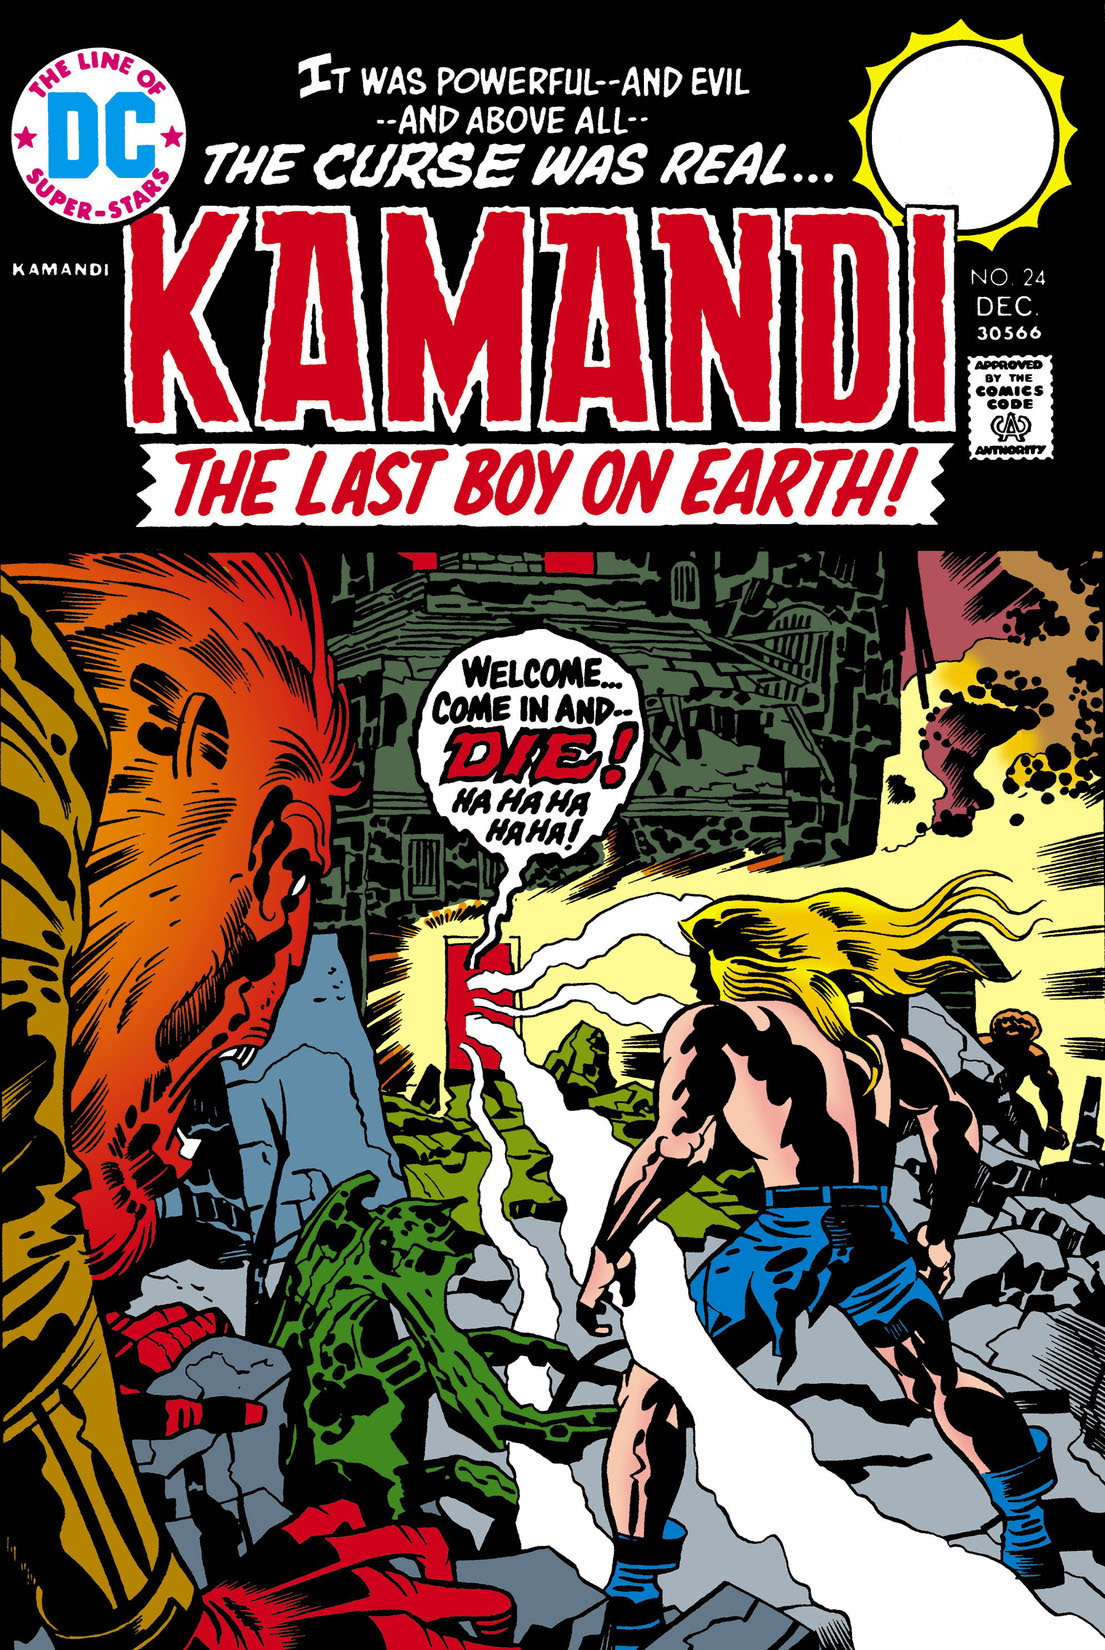 Kamandi: The Last Boy on Earth #24 preview images